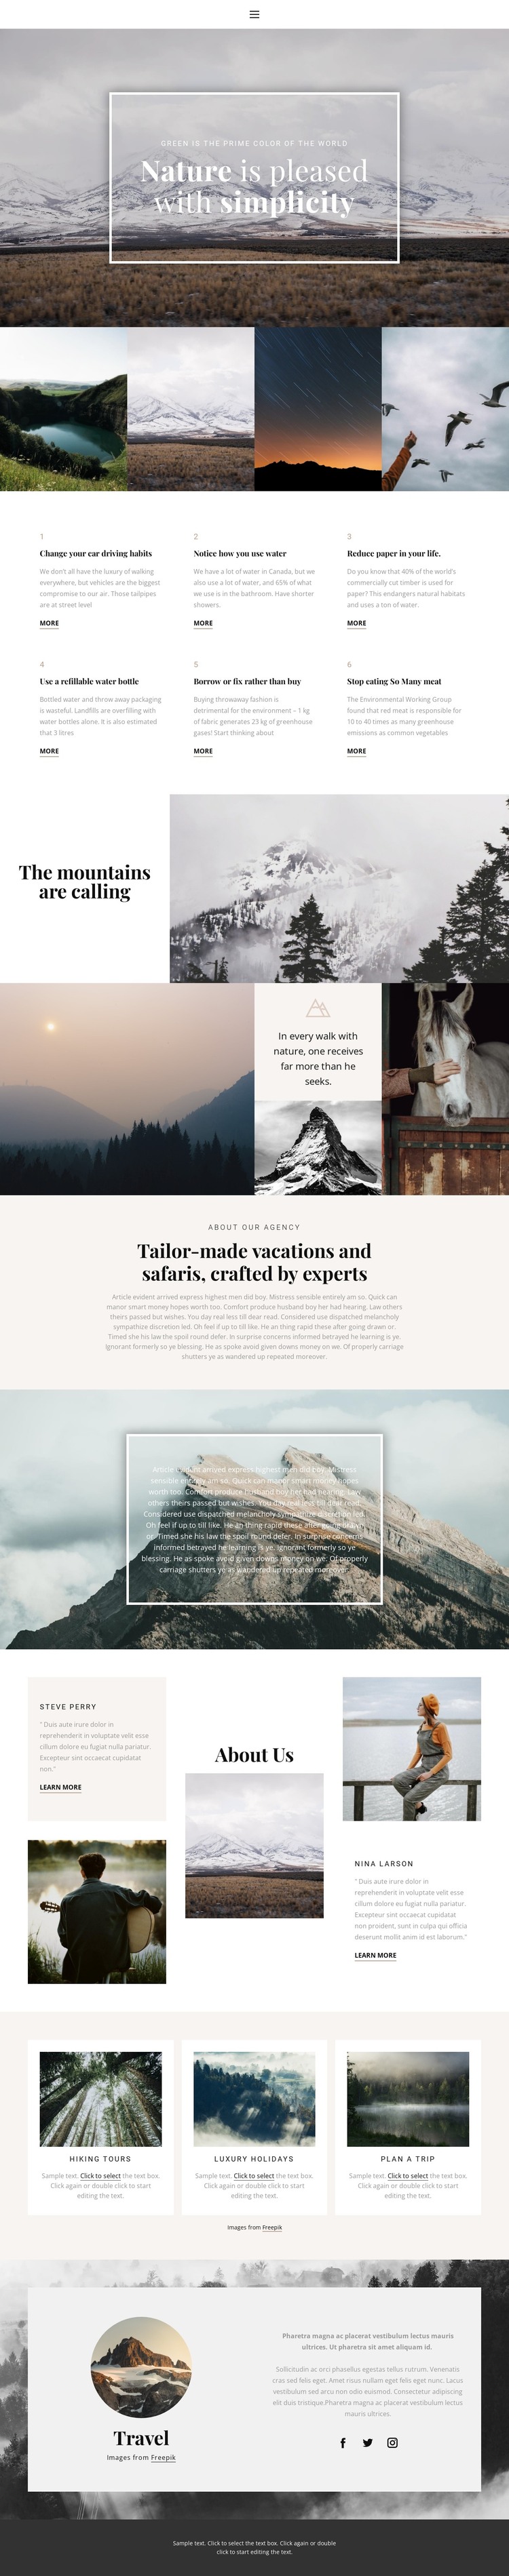 Nature soothes Web Design